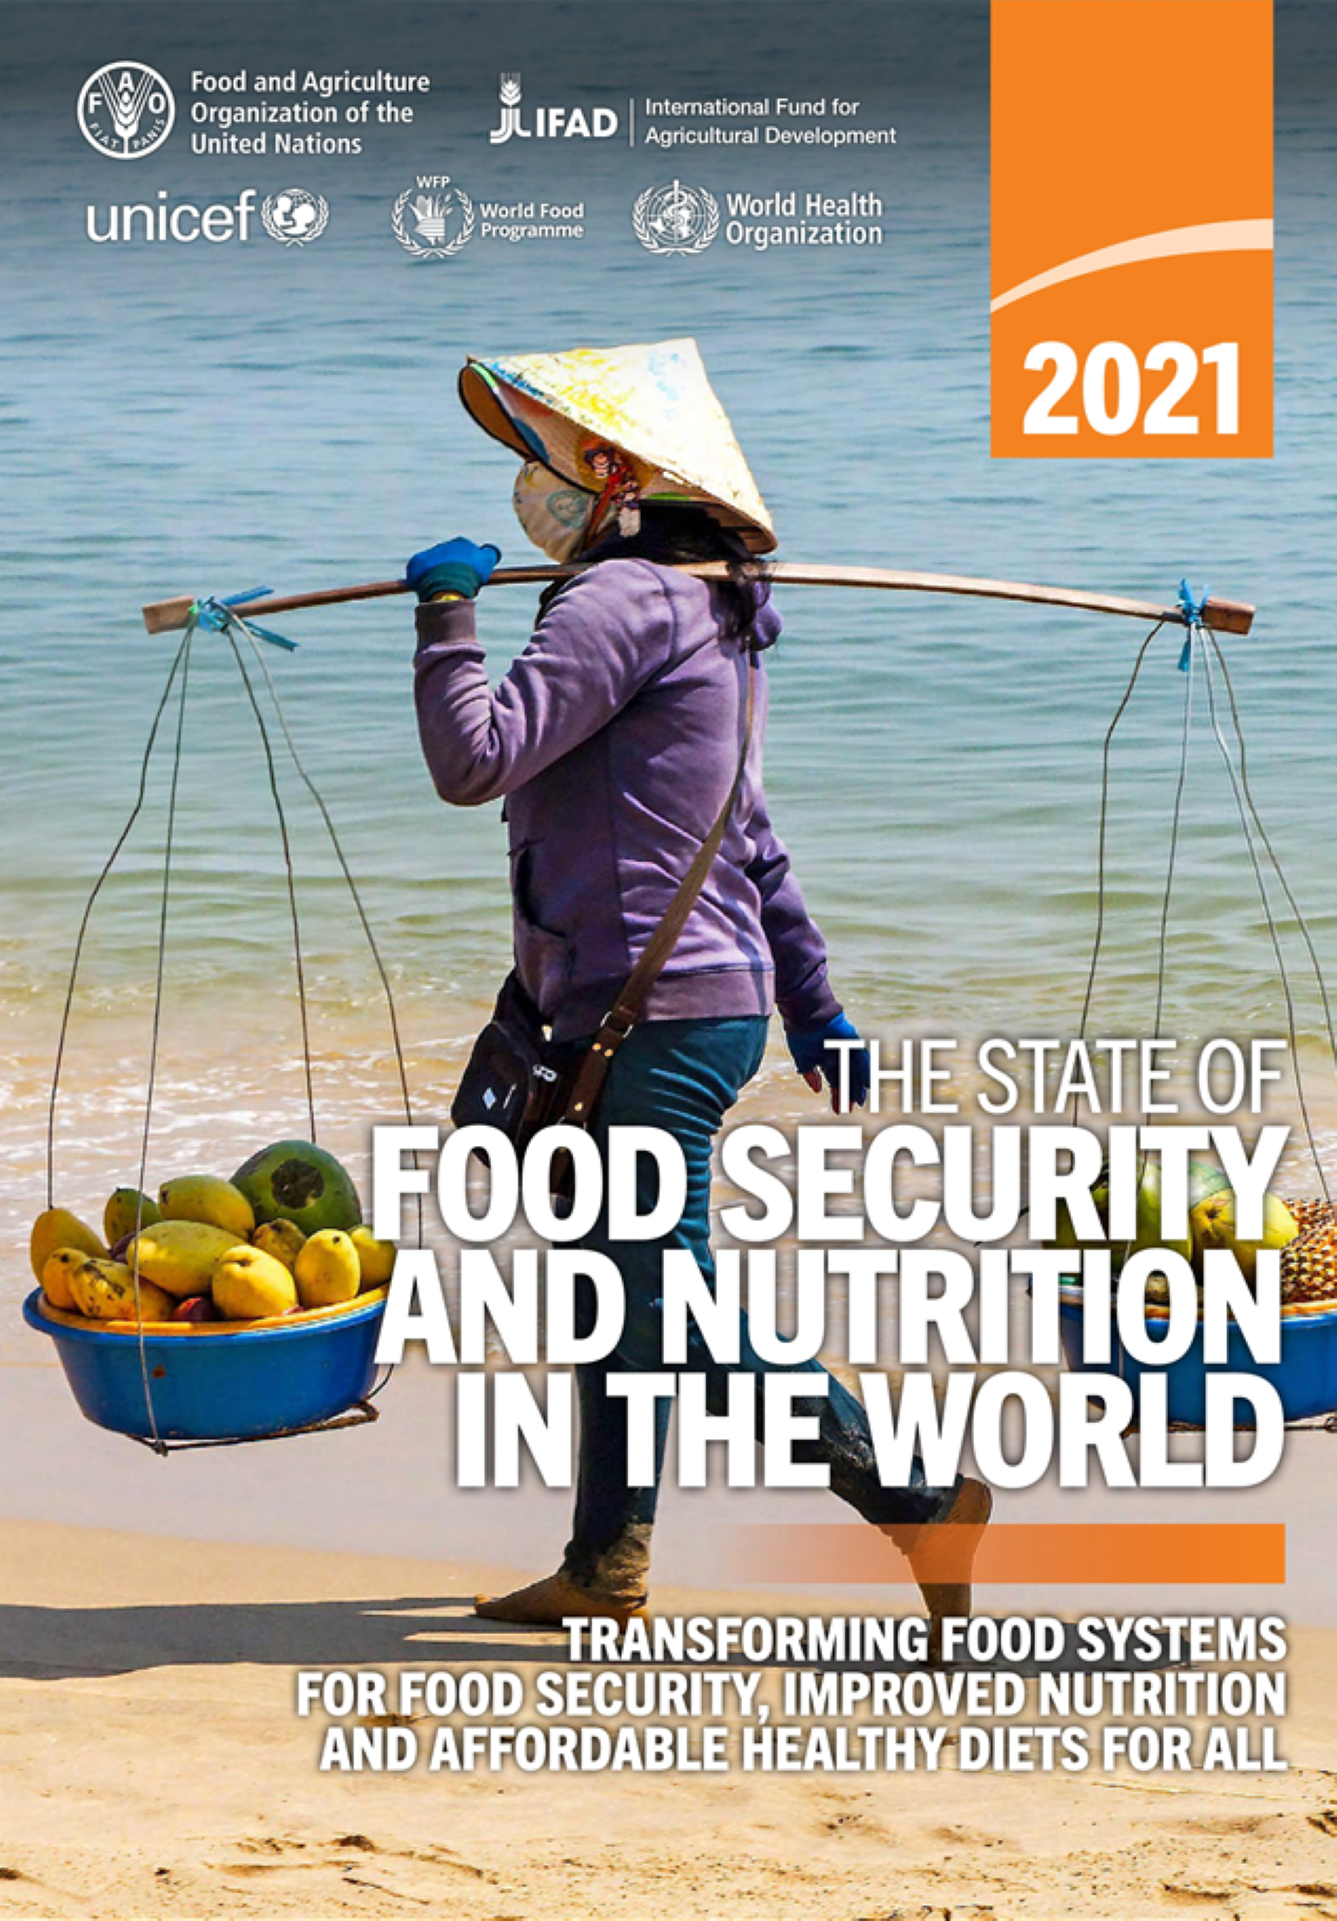 The State of Food Security and Nutrition in the World 2021